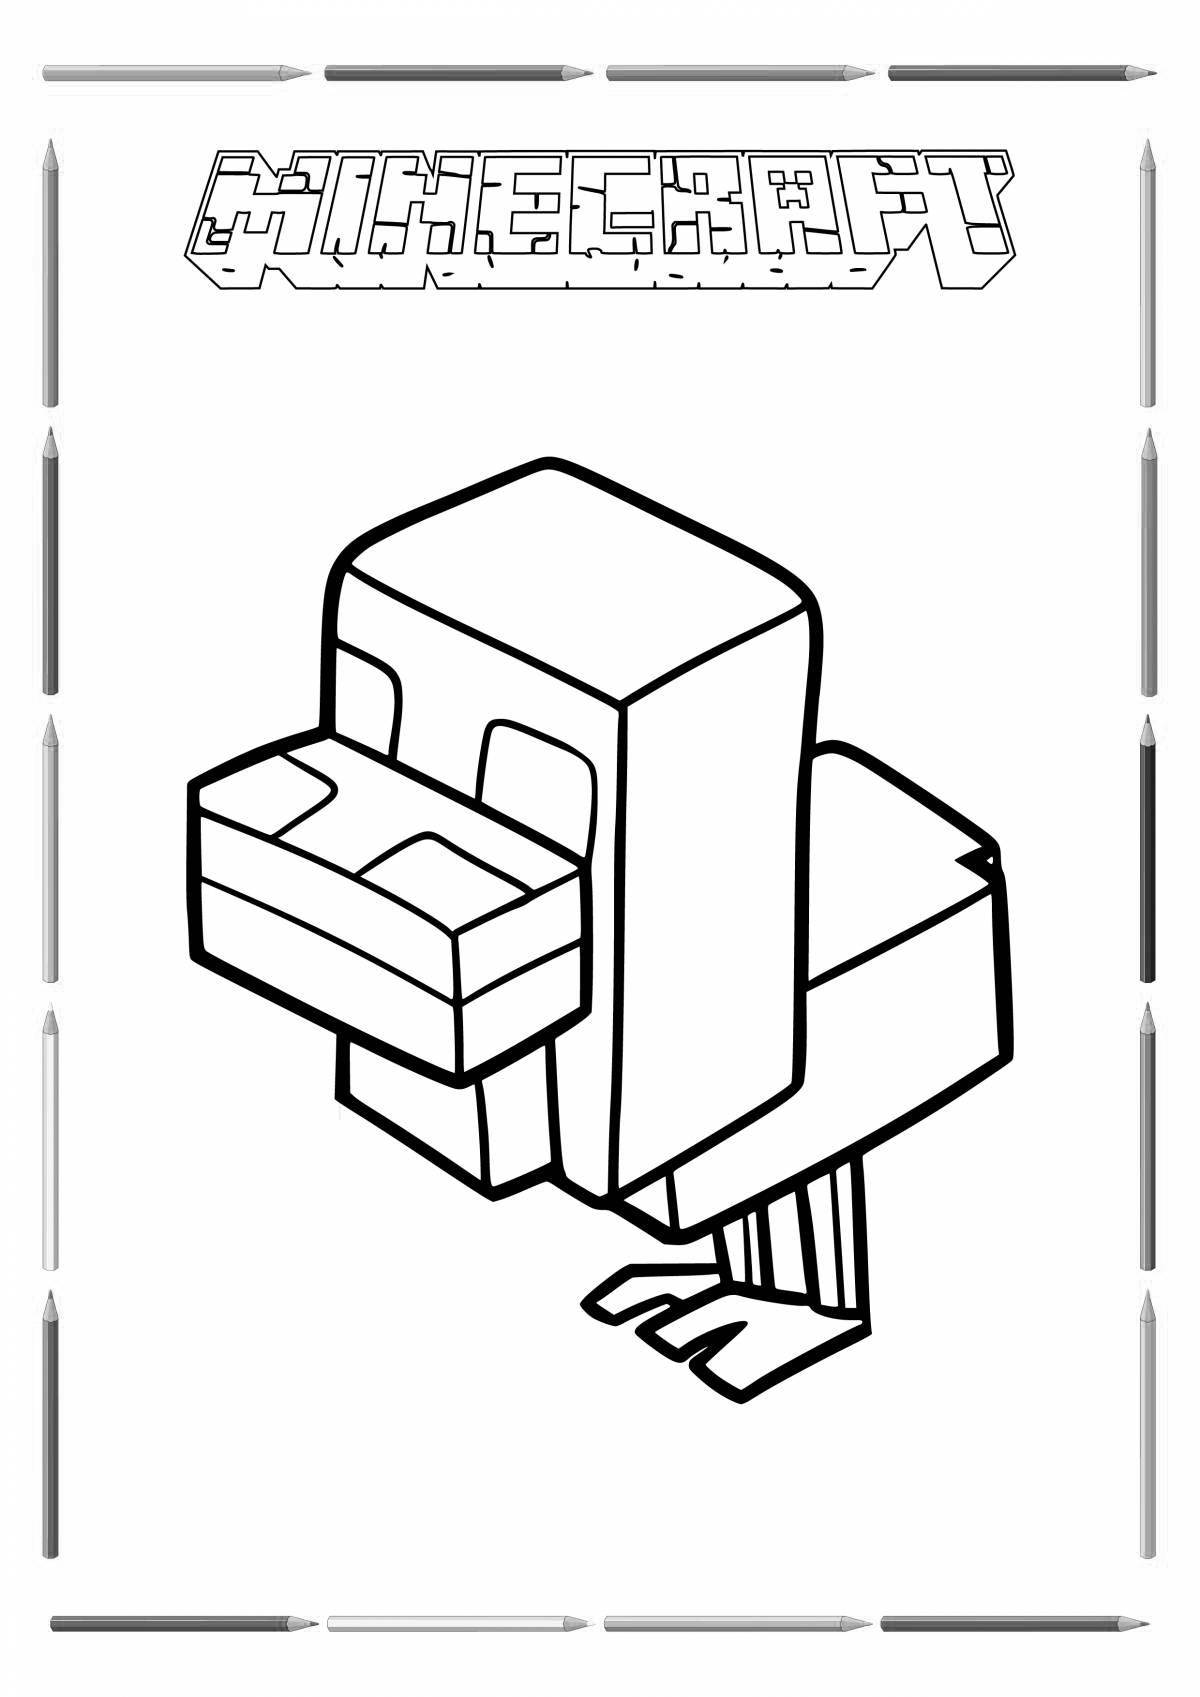 Minecraft panda funny coloring page